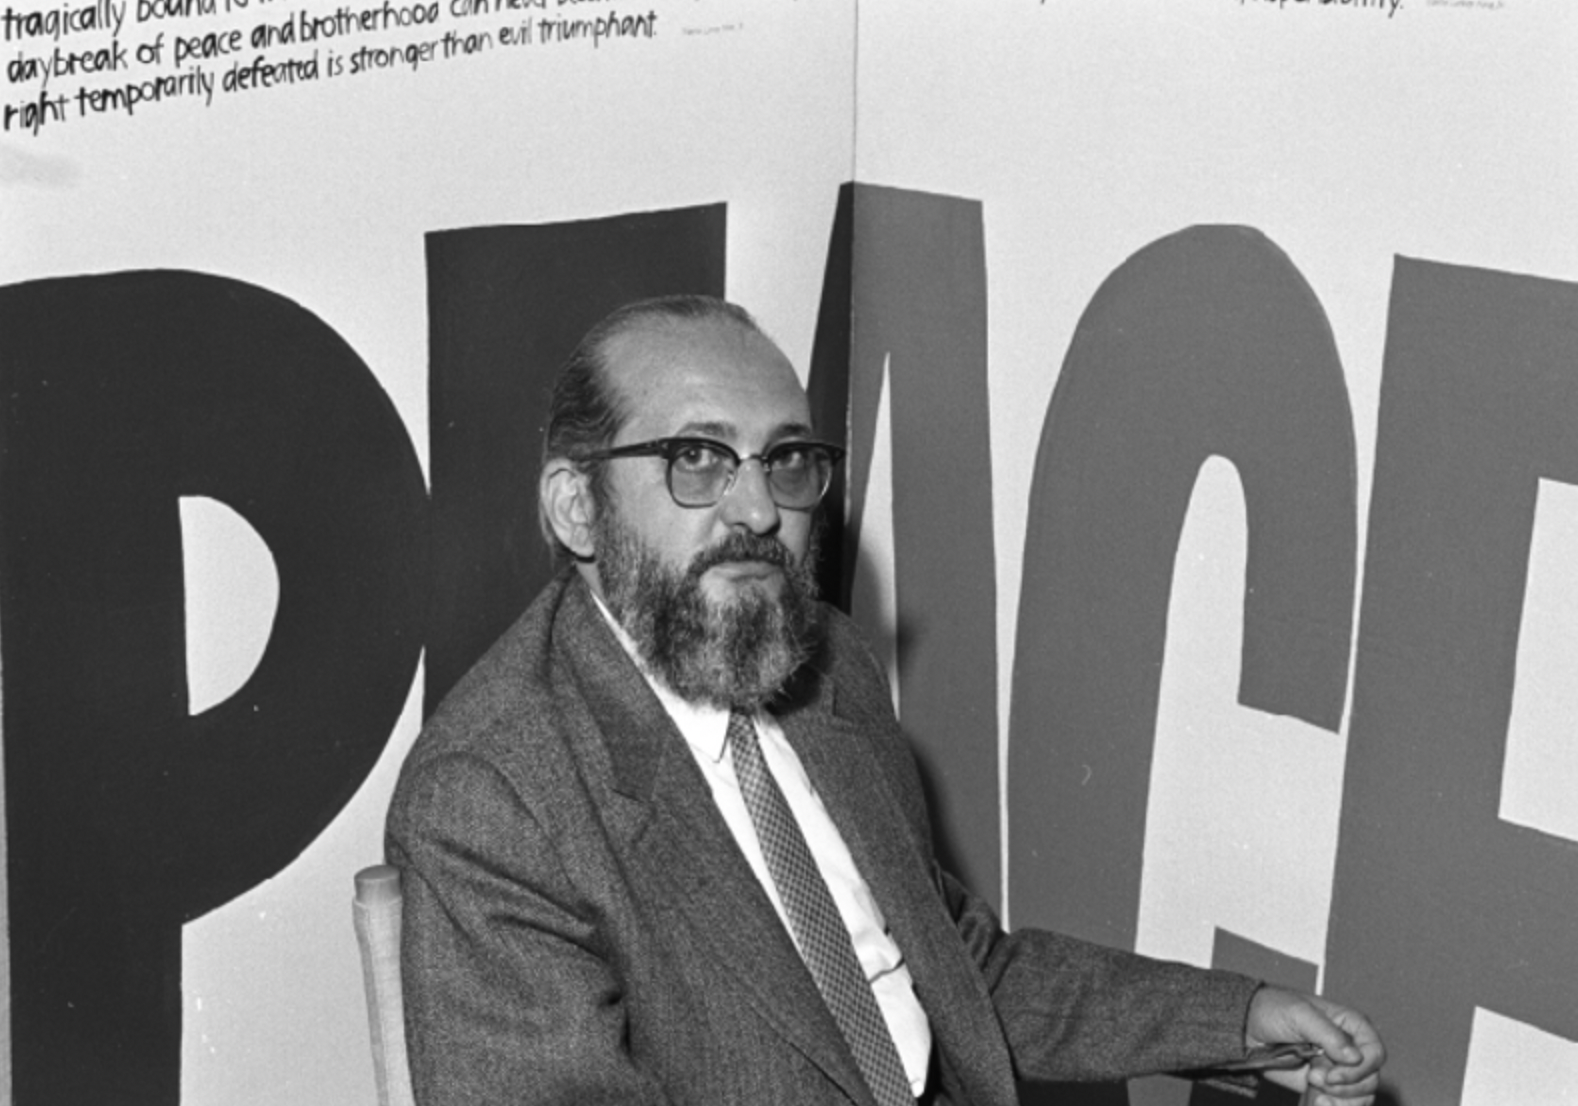 Paulo Freire at 100 still assures us the imperative of hope